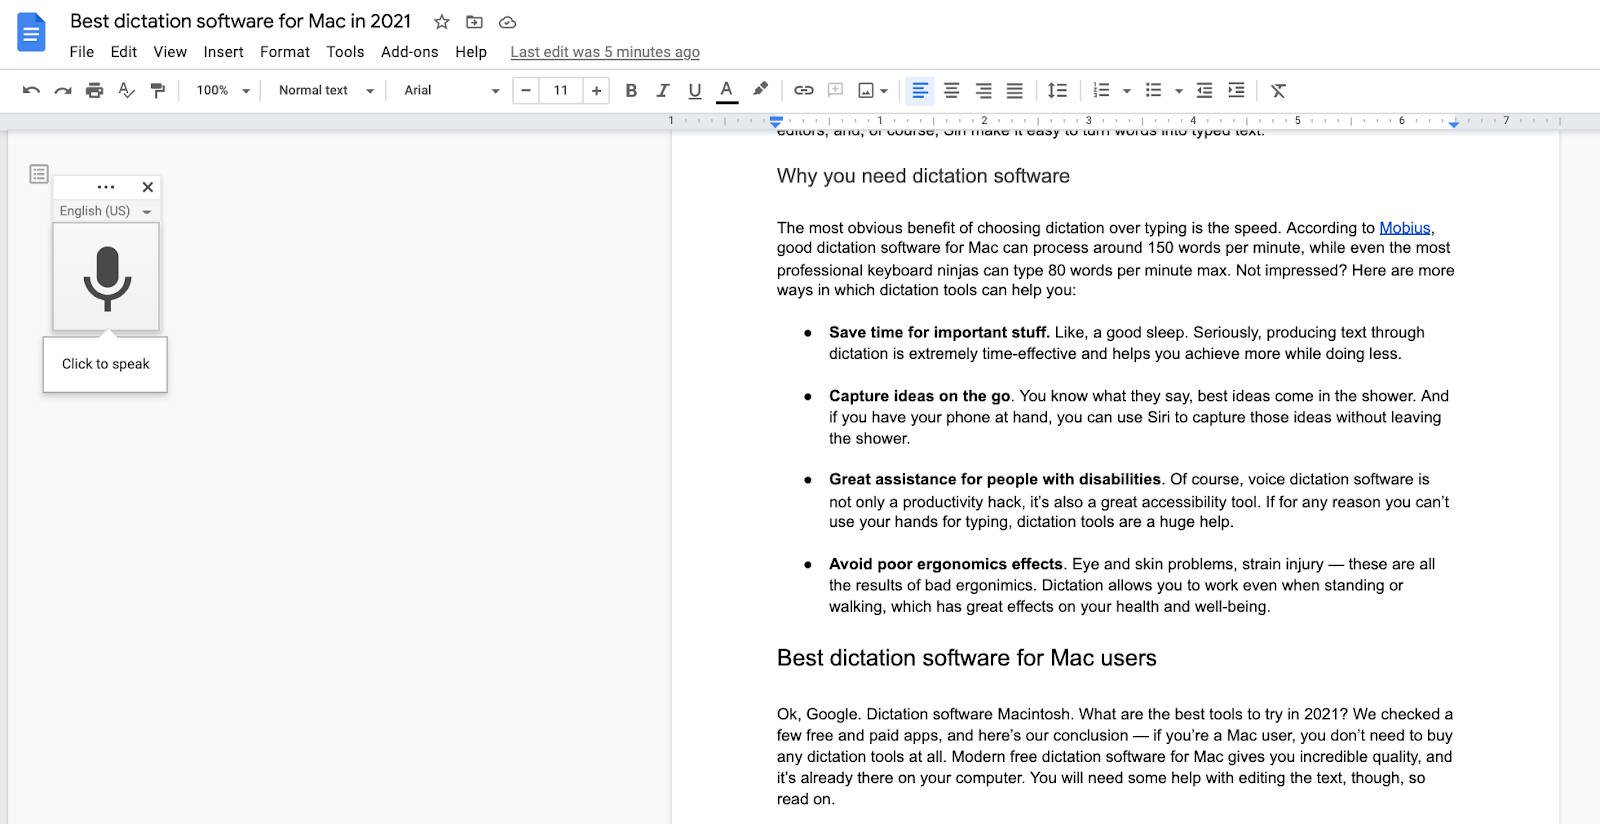 best dictation software for mac 2021